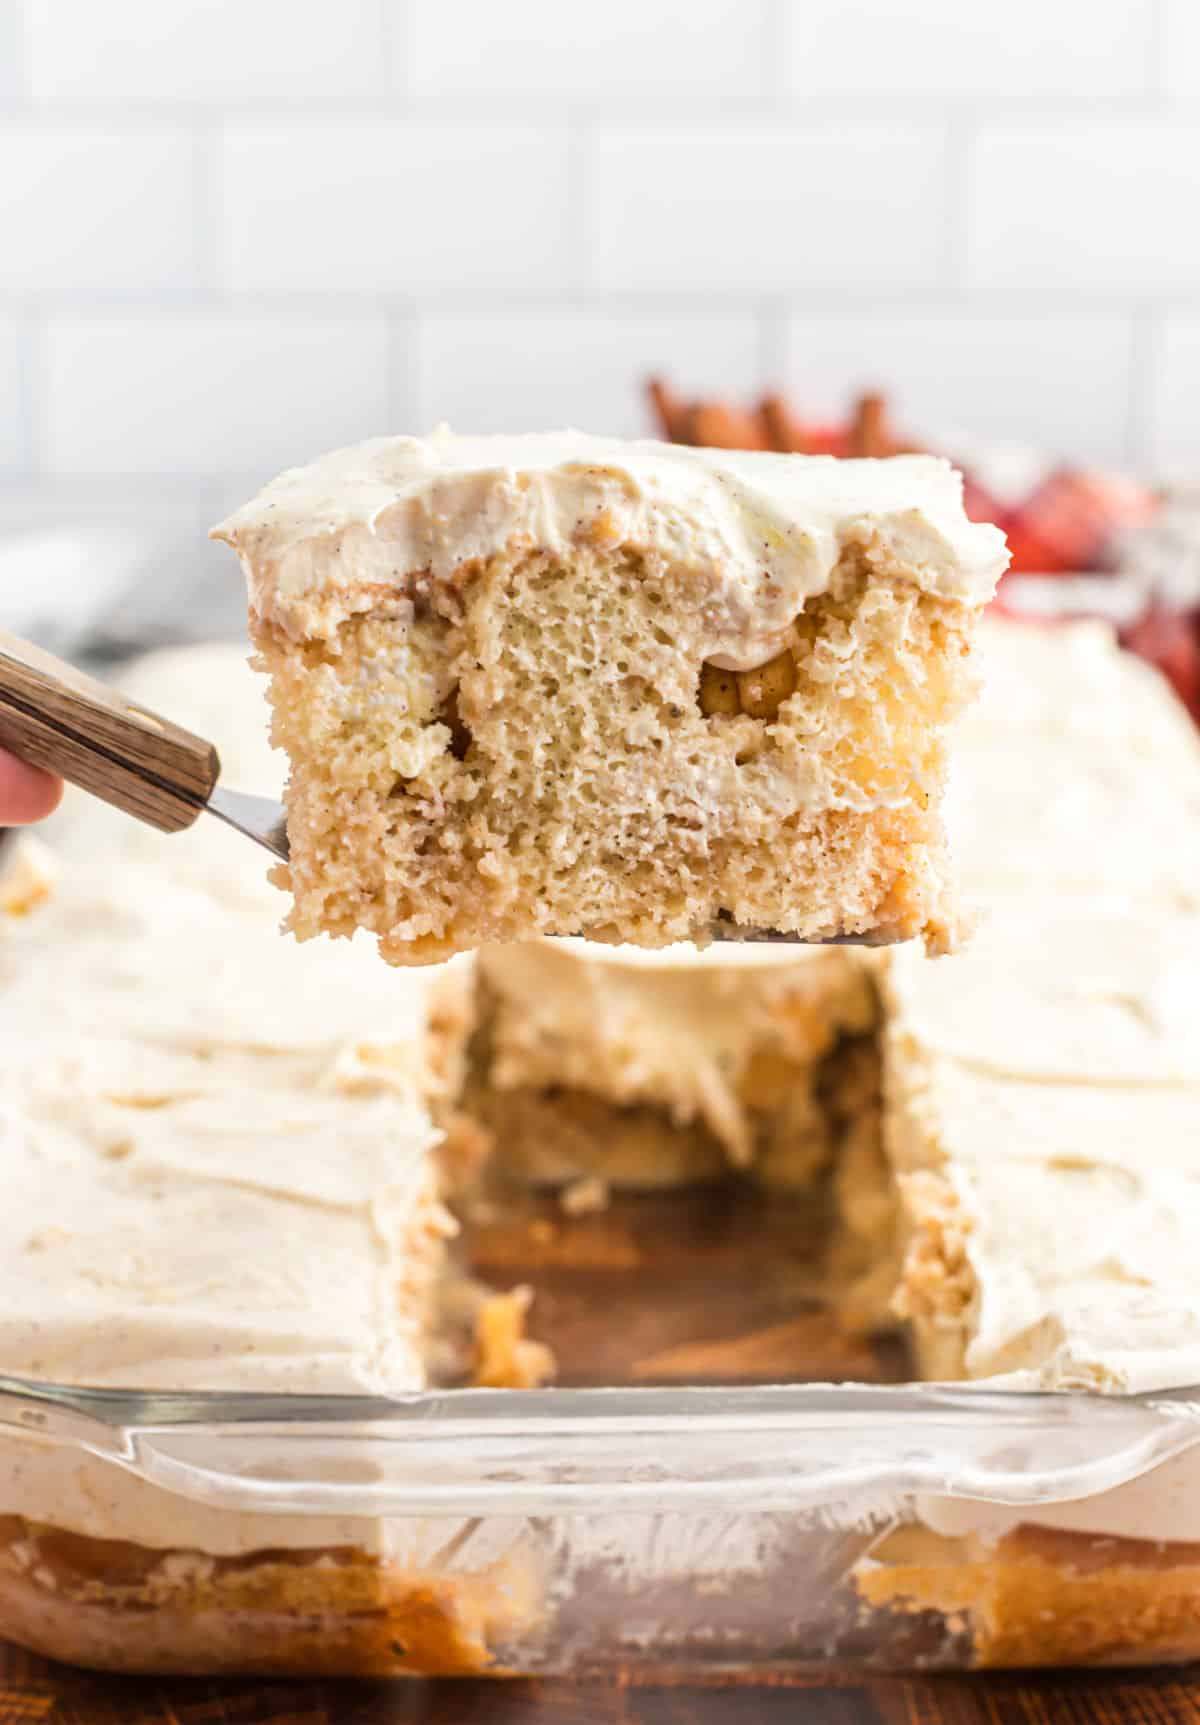 Slice of apple cake being lifted out of pan with spatula.